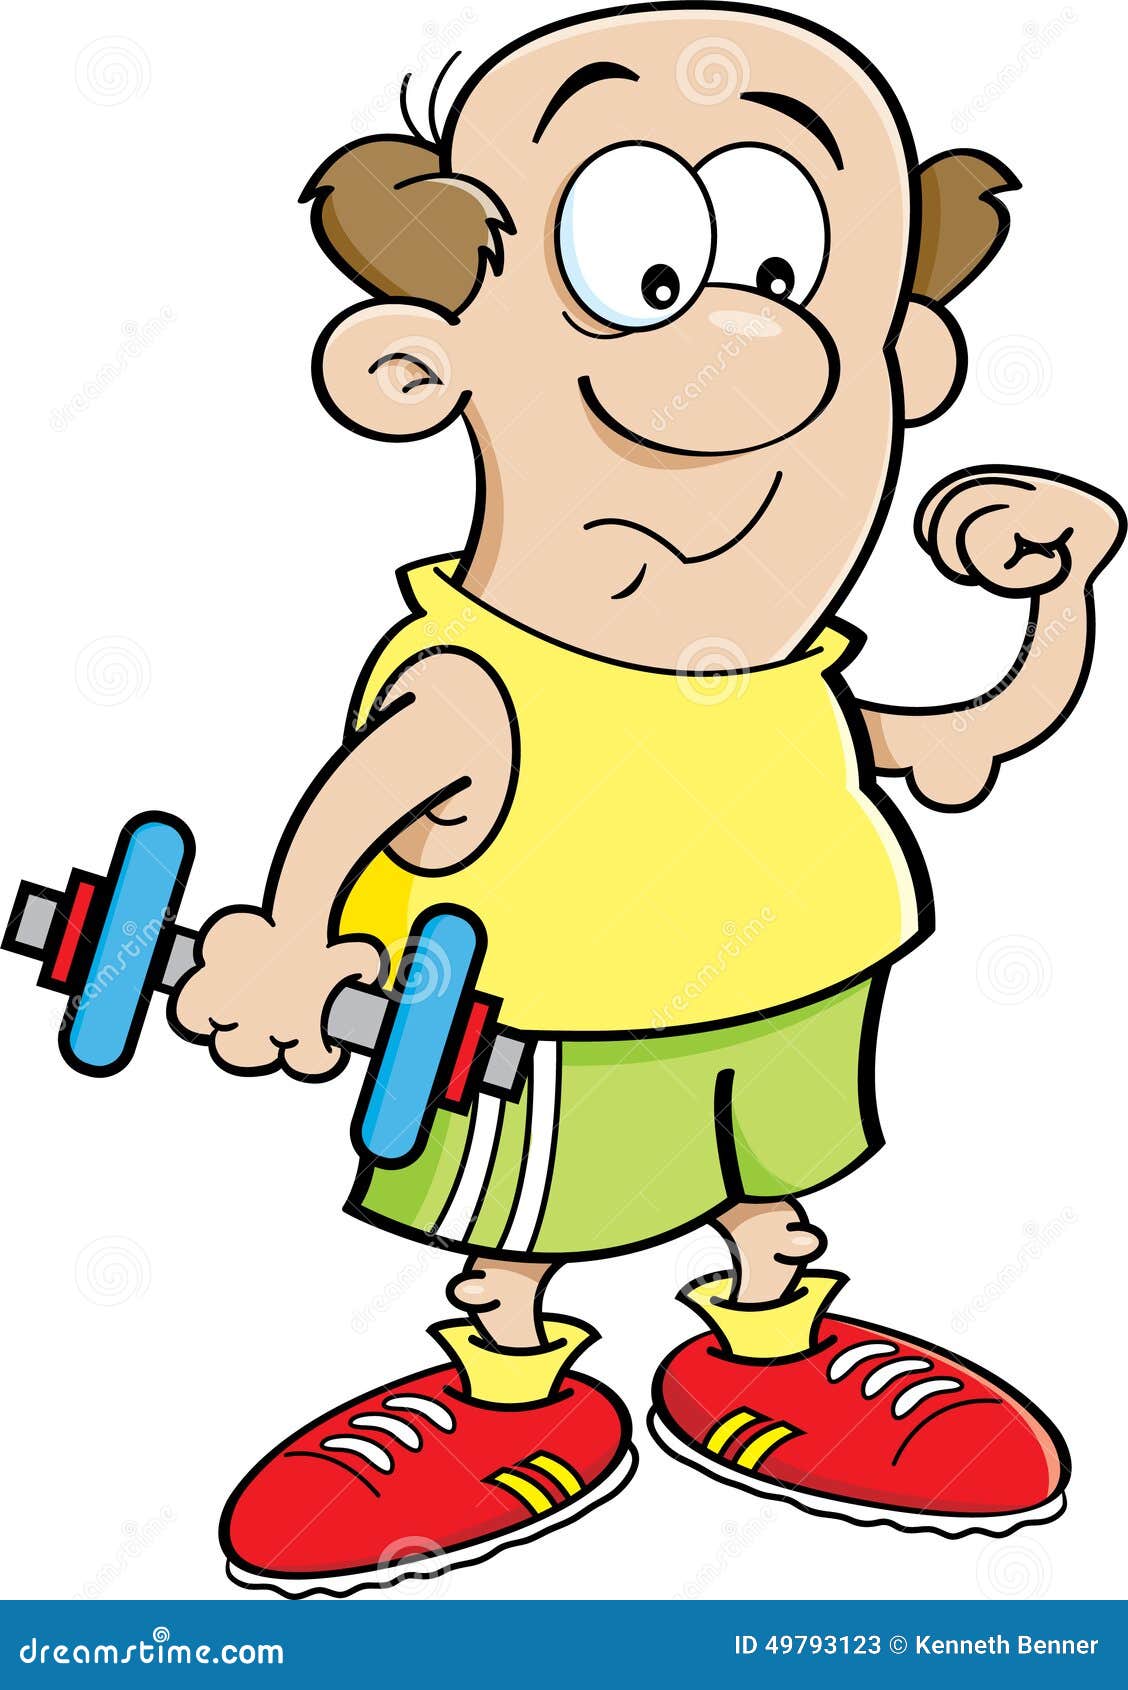 Weakling Cartoons, Illustrations & Vector Stock Images - 60 Pictures to